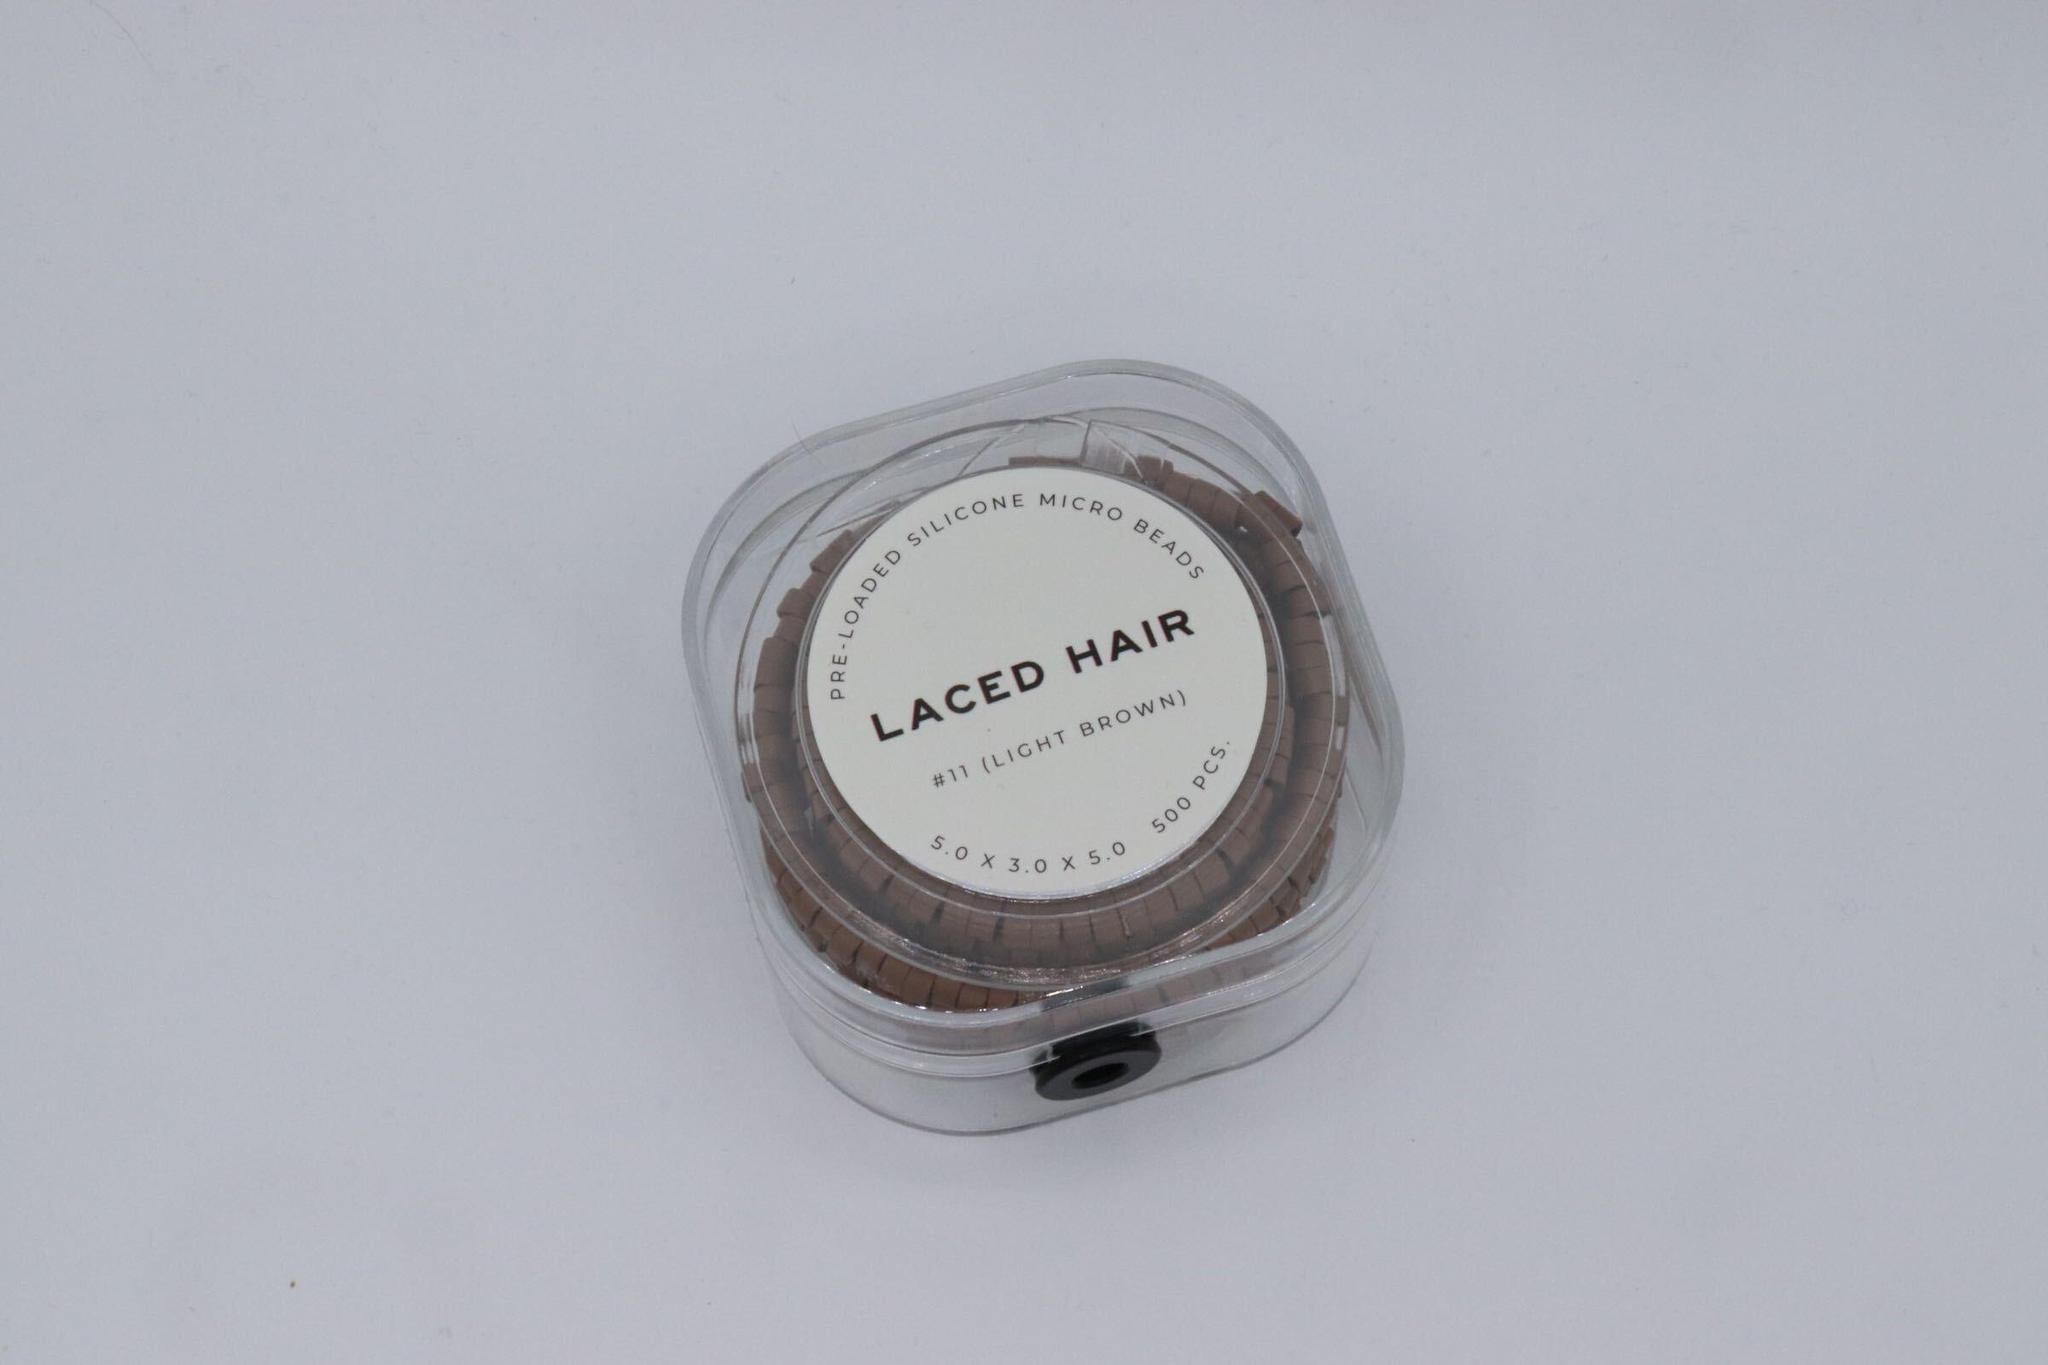 Laced Hair Pre-Loaded Silicone Lined Micro Bead Large (5.0 x 3.0 x 3.0)